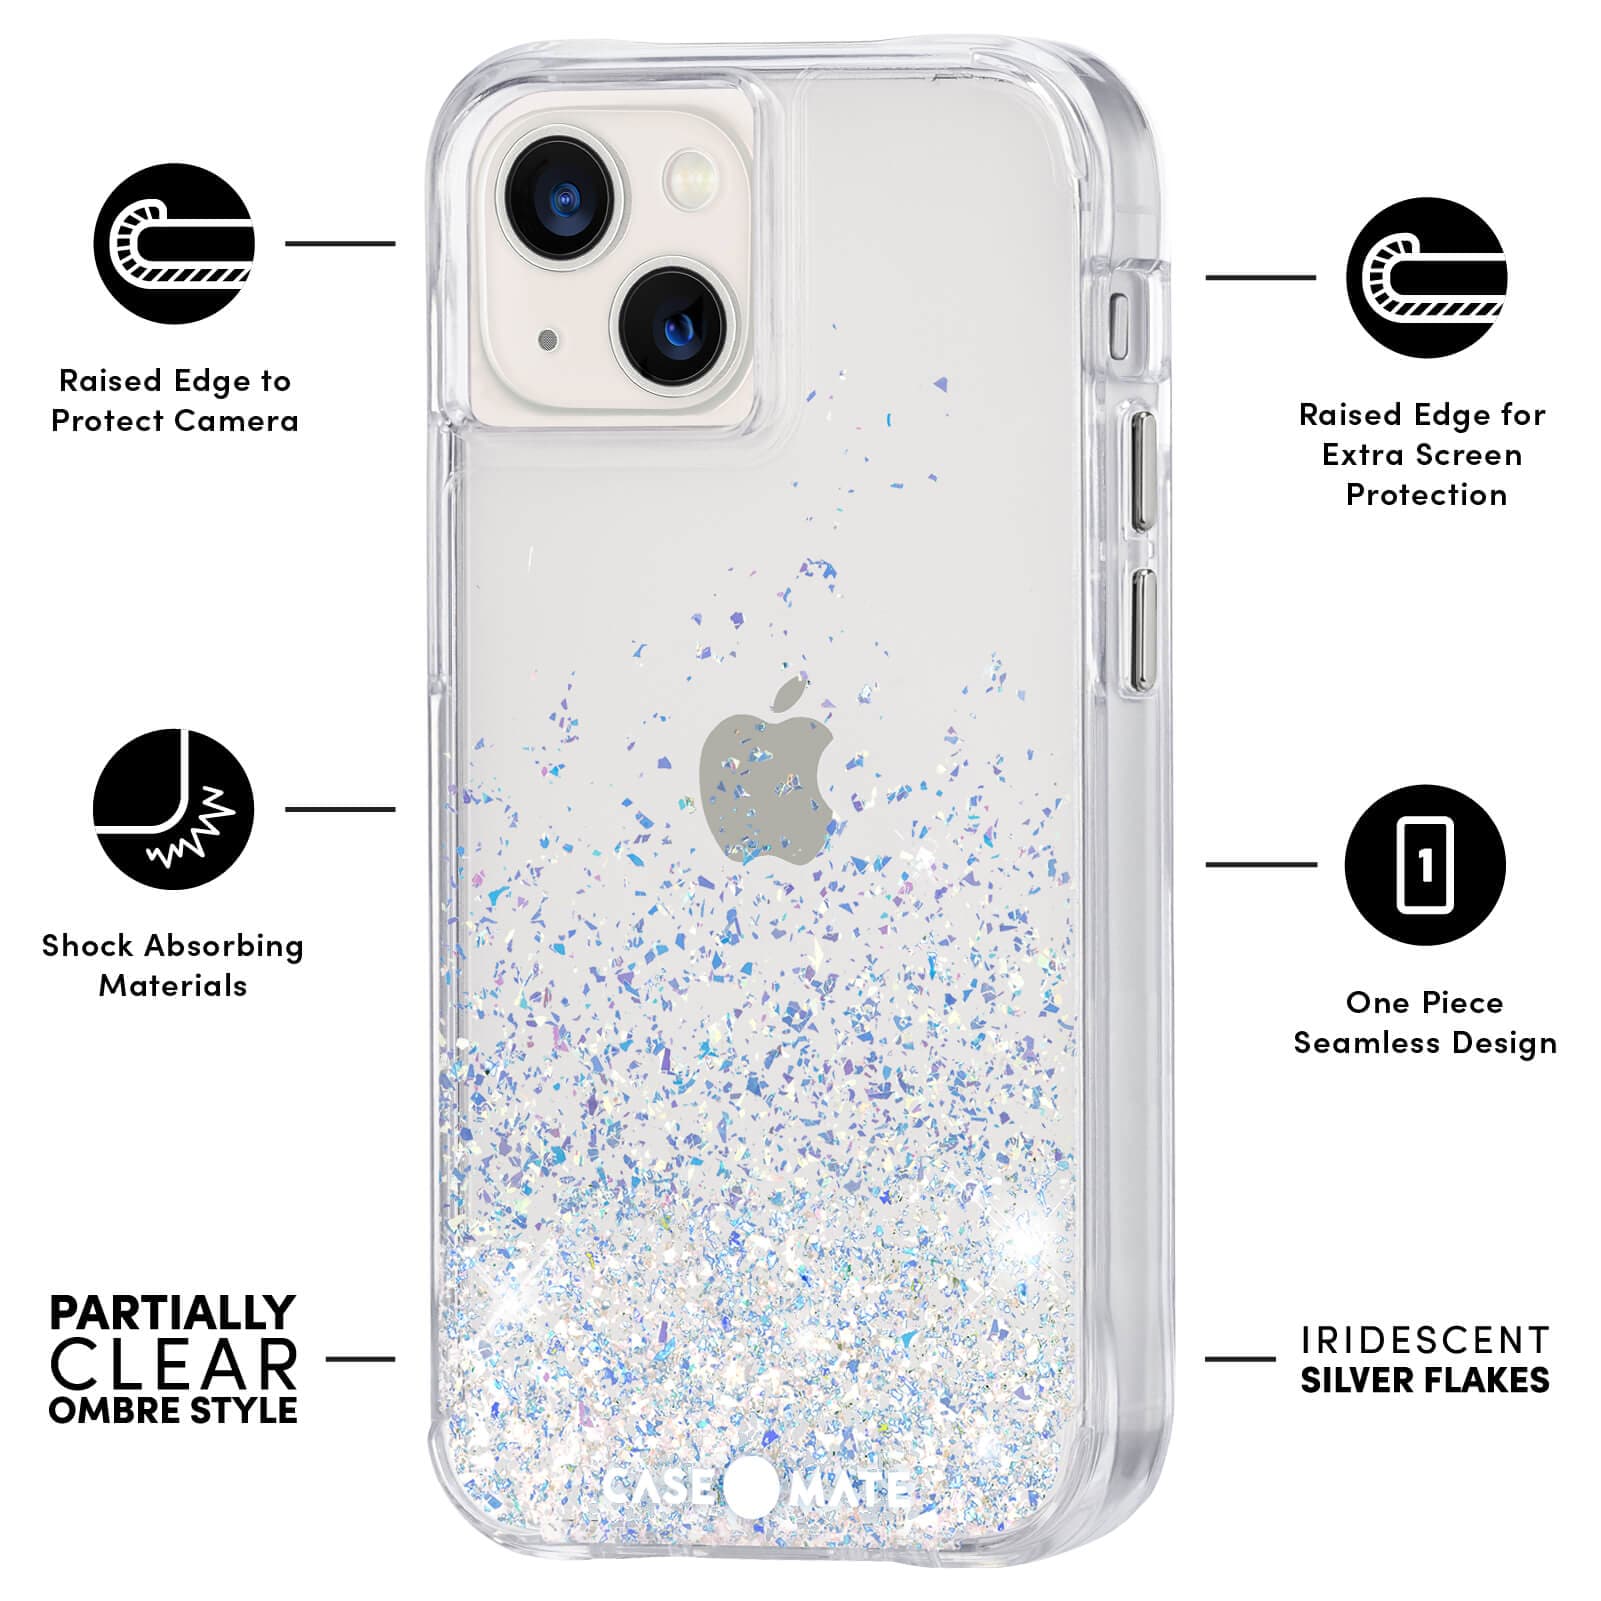 FEATURES: RAISED EDGE TO PROTECT CAMERA, SHOCK ABSORBING MATERIALS, PARTIALLY CLEAR OMBRE STYLE, RAISED EDGE FOR EXTRA SCREEN PROTECTION, ONE PIECE SEAMLESS DESIGN, IRIDESCENT SILVER FLAKES. COLOR::TWINKLE STARDUST